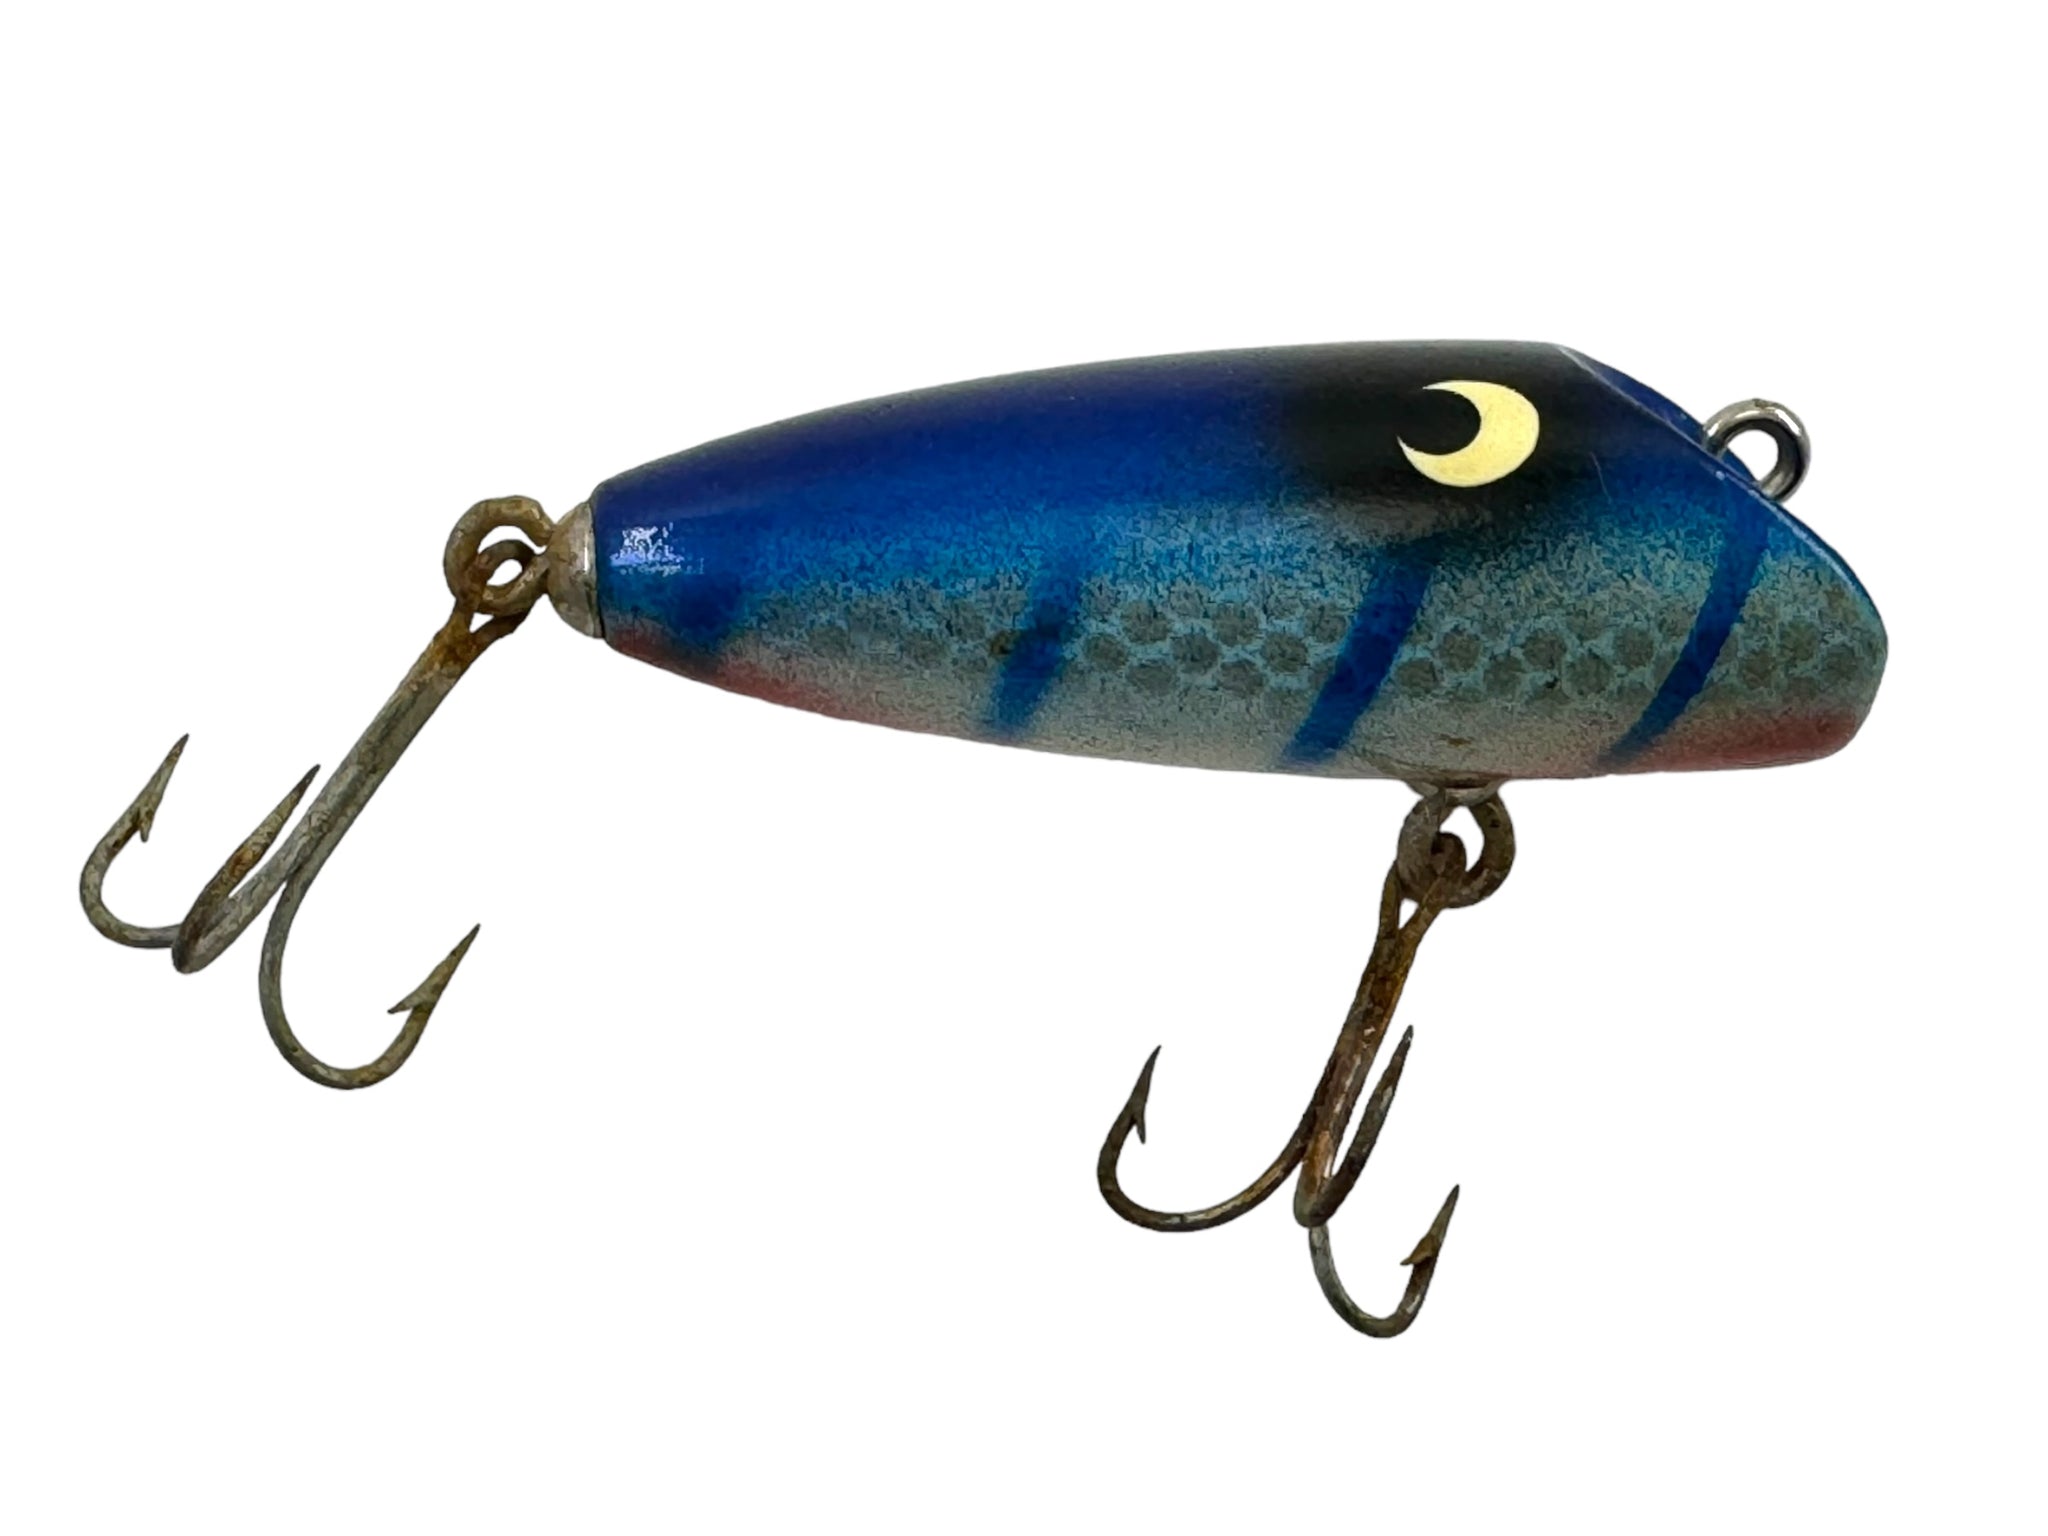 EPPINGER'S Vintage WOOD TOPWATER Fishing Lure – Toad Tackle